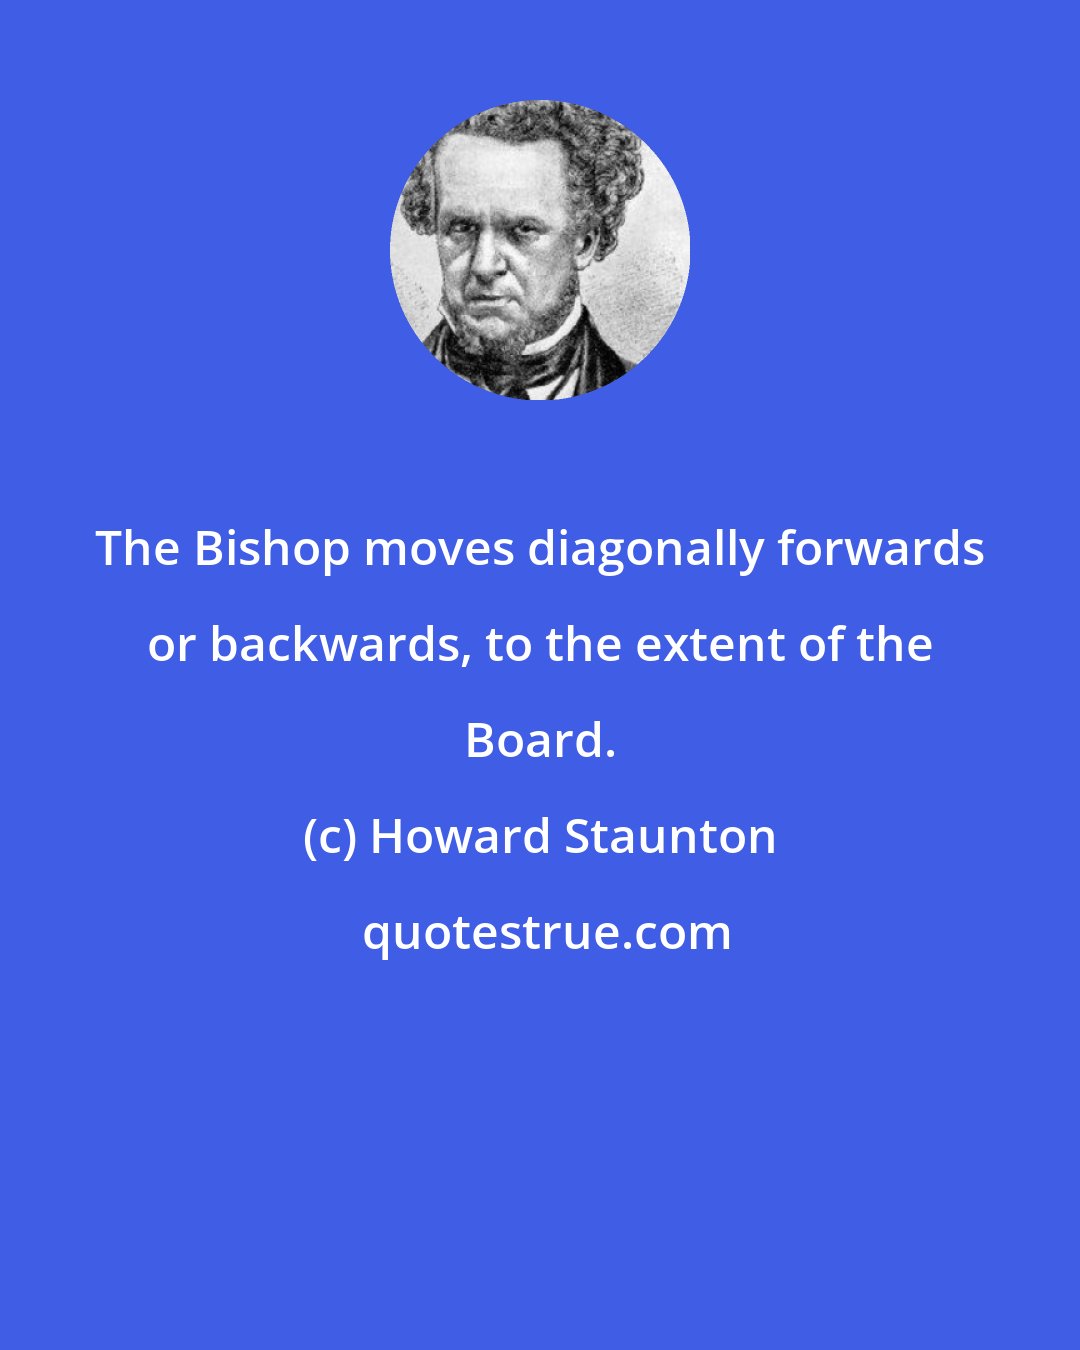 Howard Staunton: The Bishop moves diagonally forwards or backwards, to the extent of the Board.